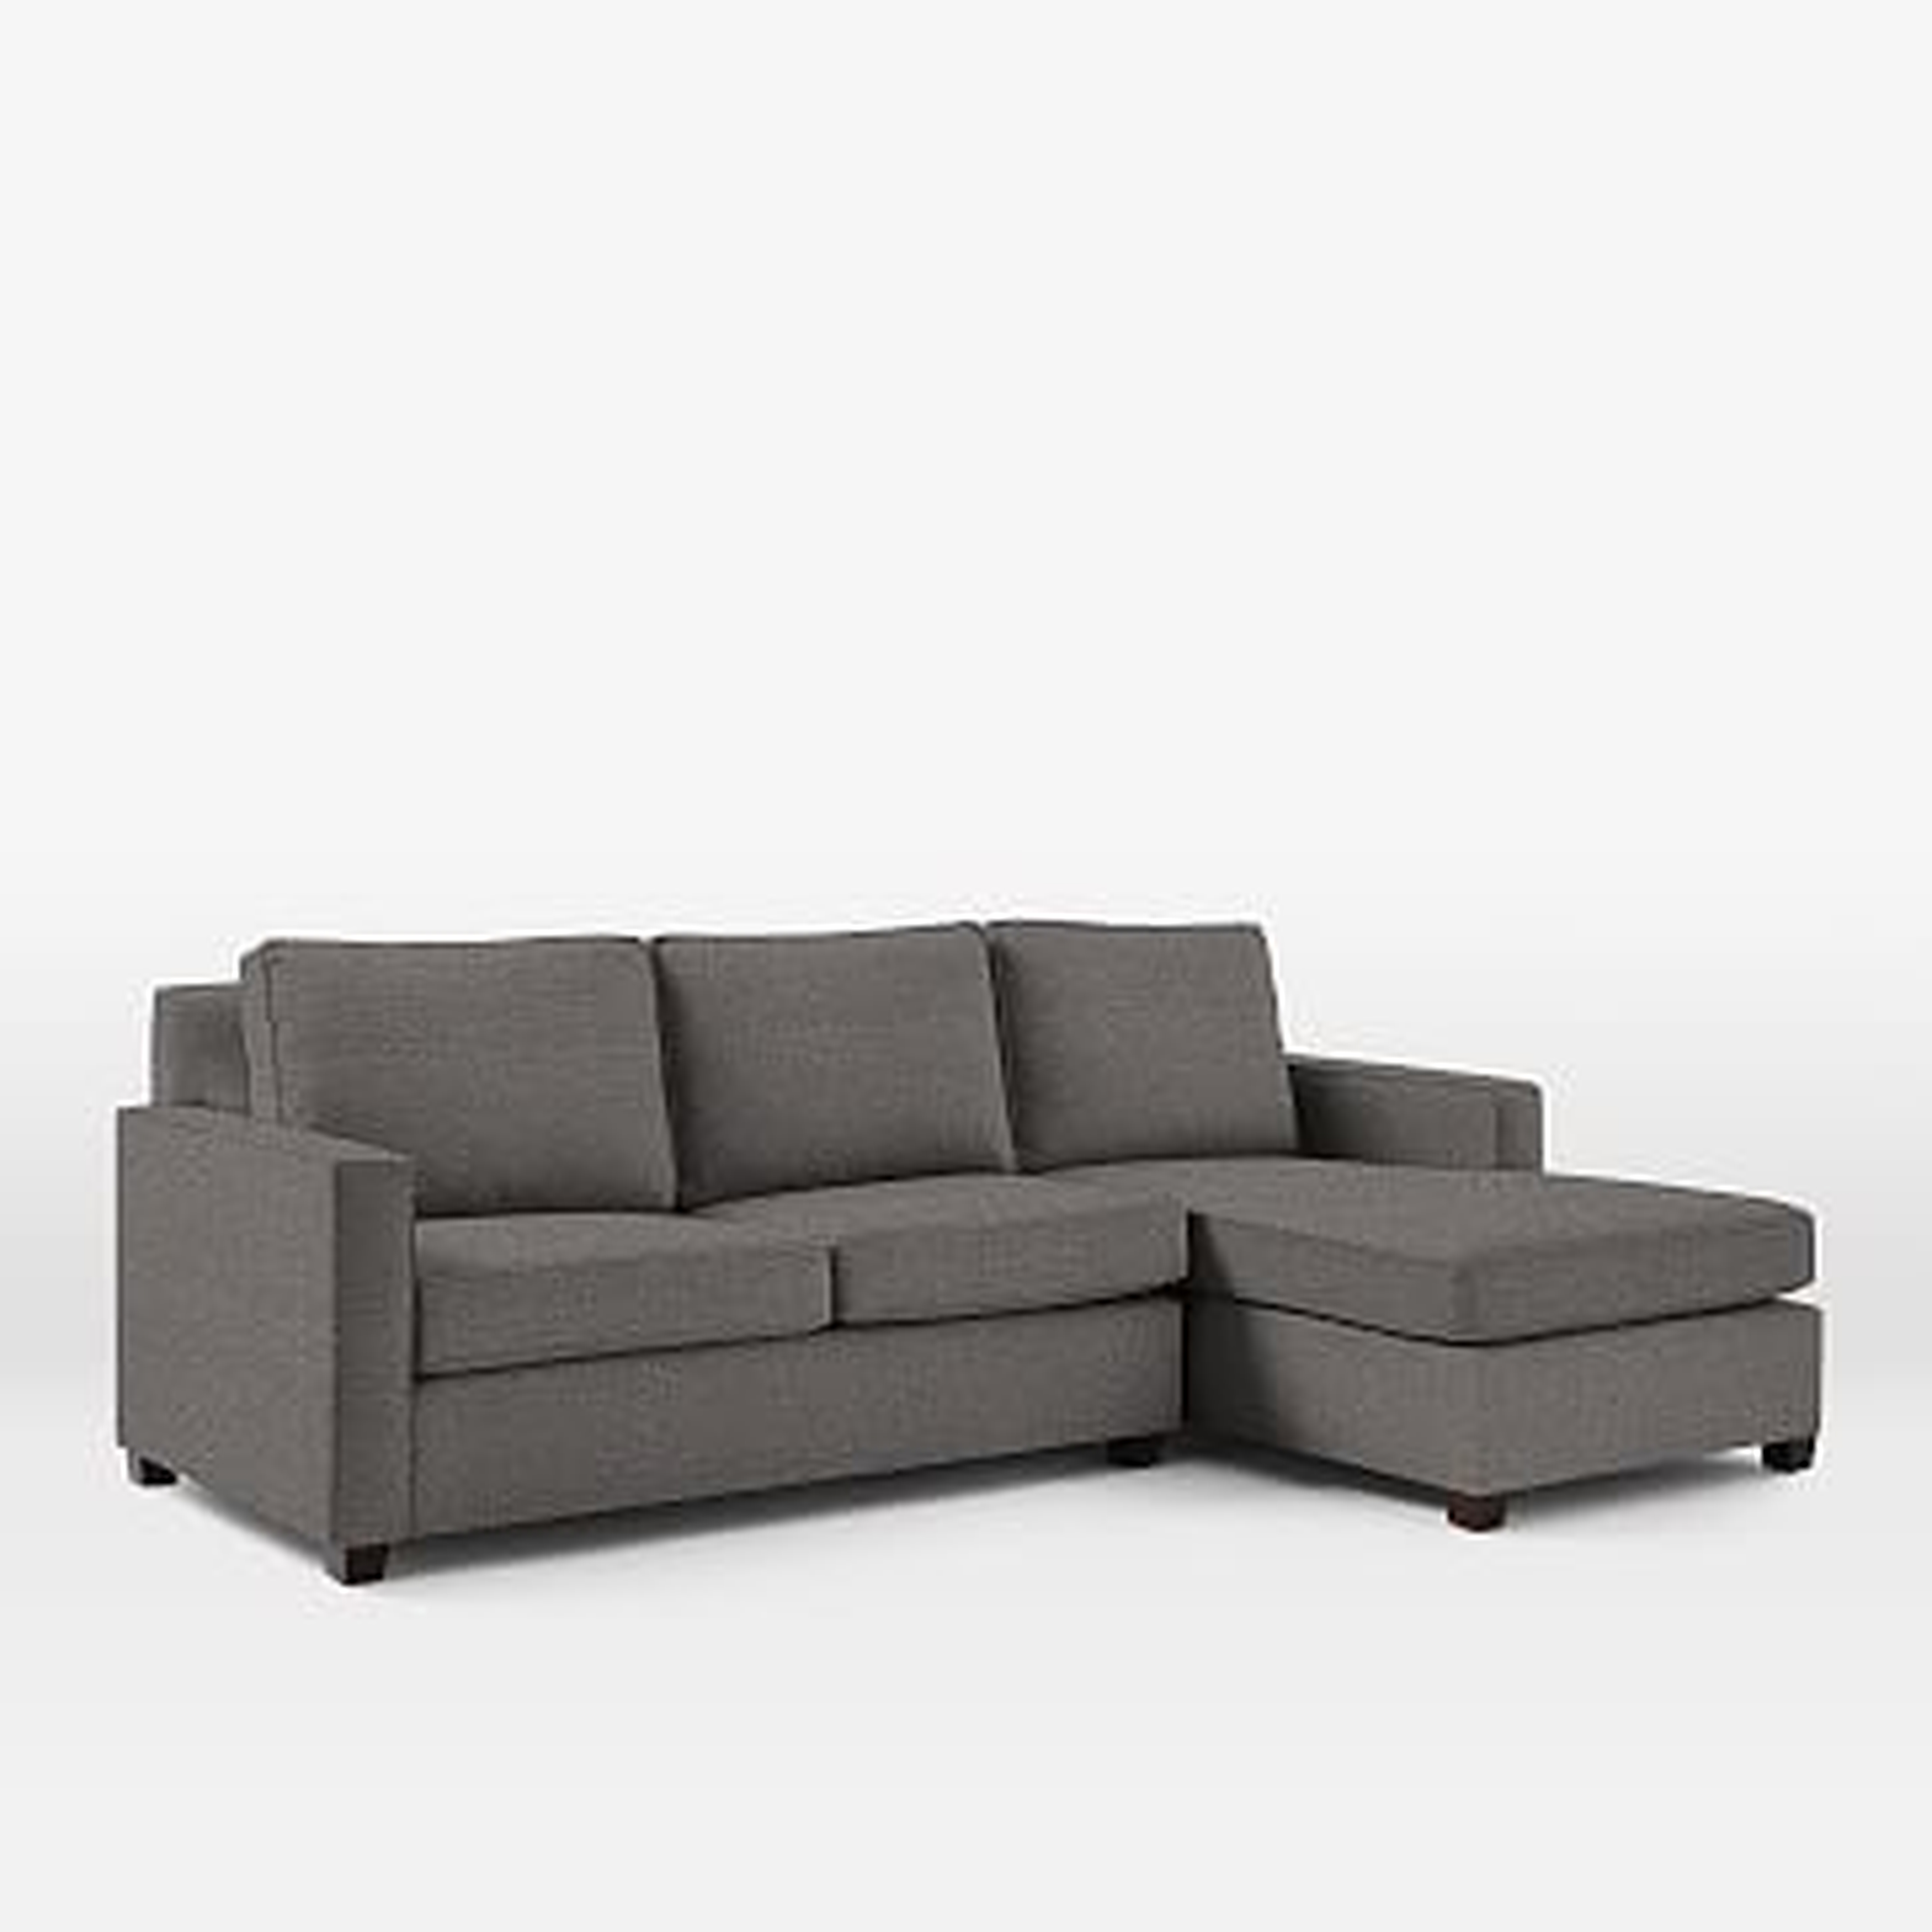 Henry Sectional Set 14: Right Arm Chaise, Left Arm Loveseat, Chenille Tweed, Slate - West Elm